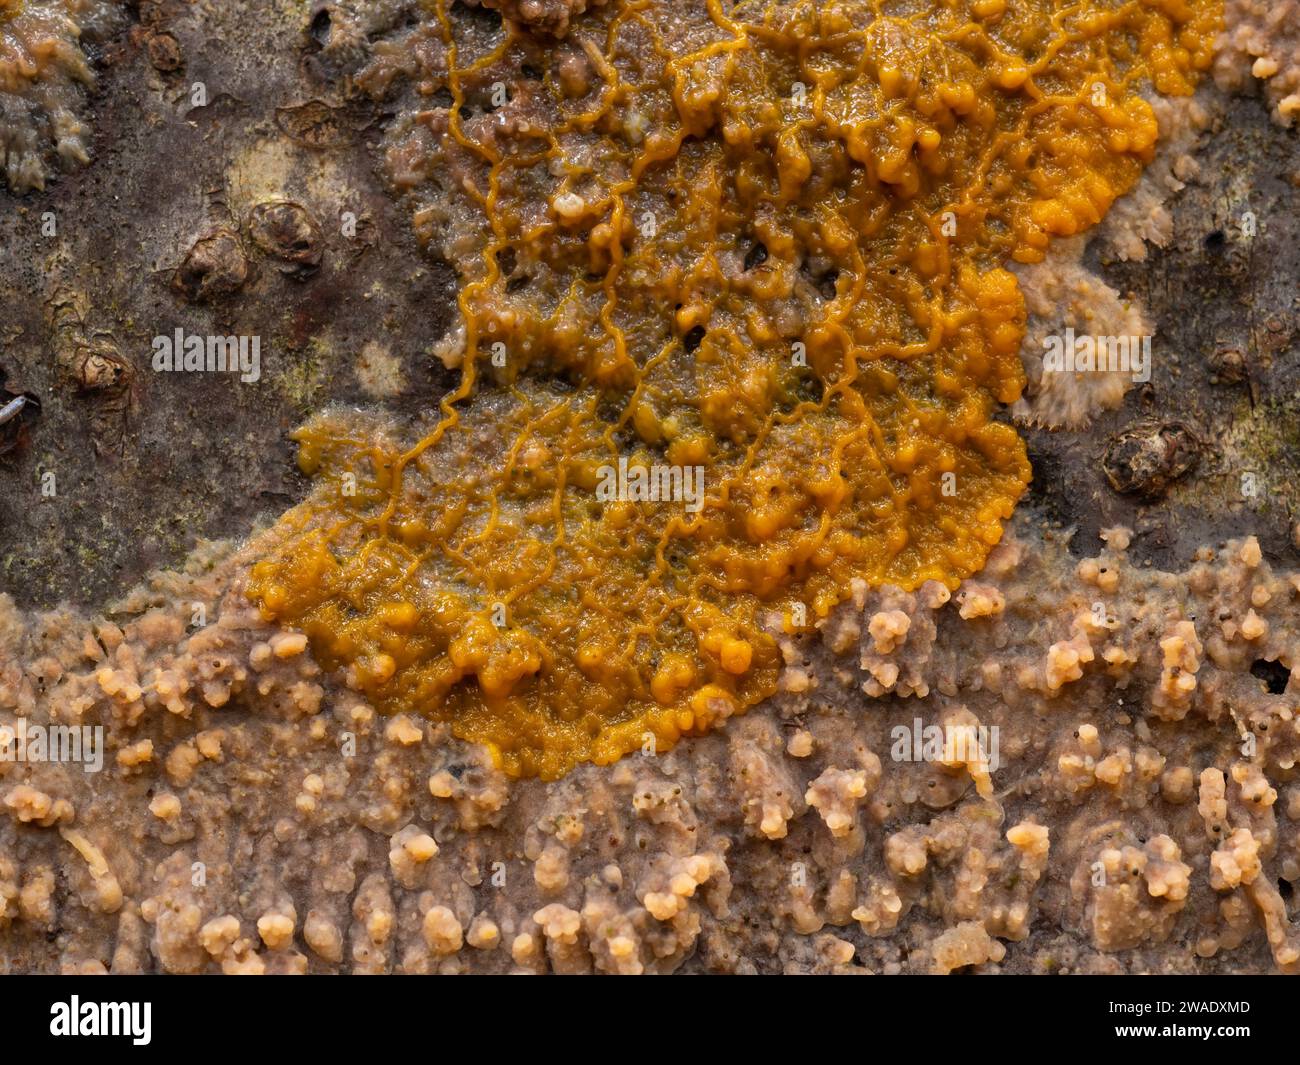 Close-up of the orange-colored plasmodium of a slime mold (Badhamia utricularis) speading across and feeding on a wrinkled crust fungus (Phlebia radia Stock Photo